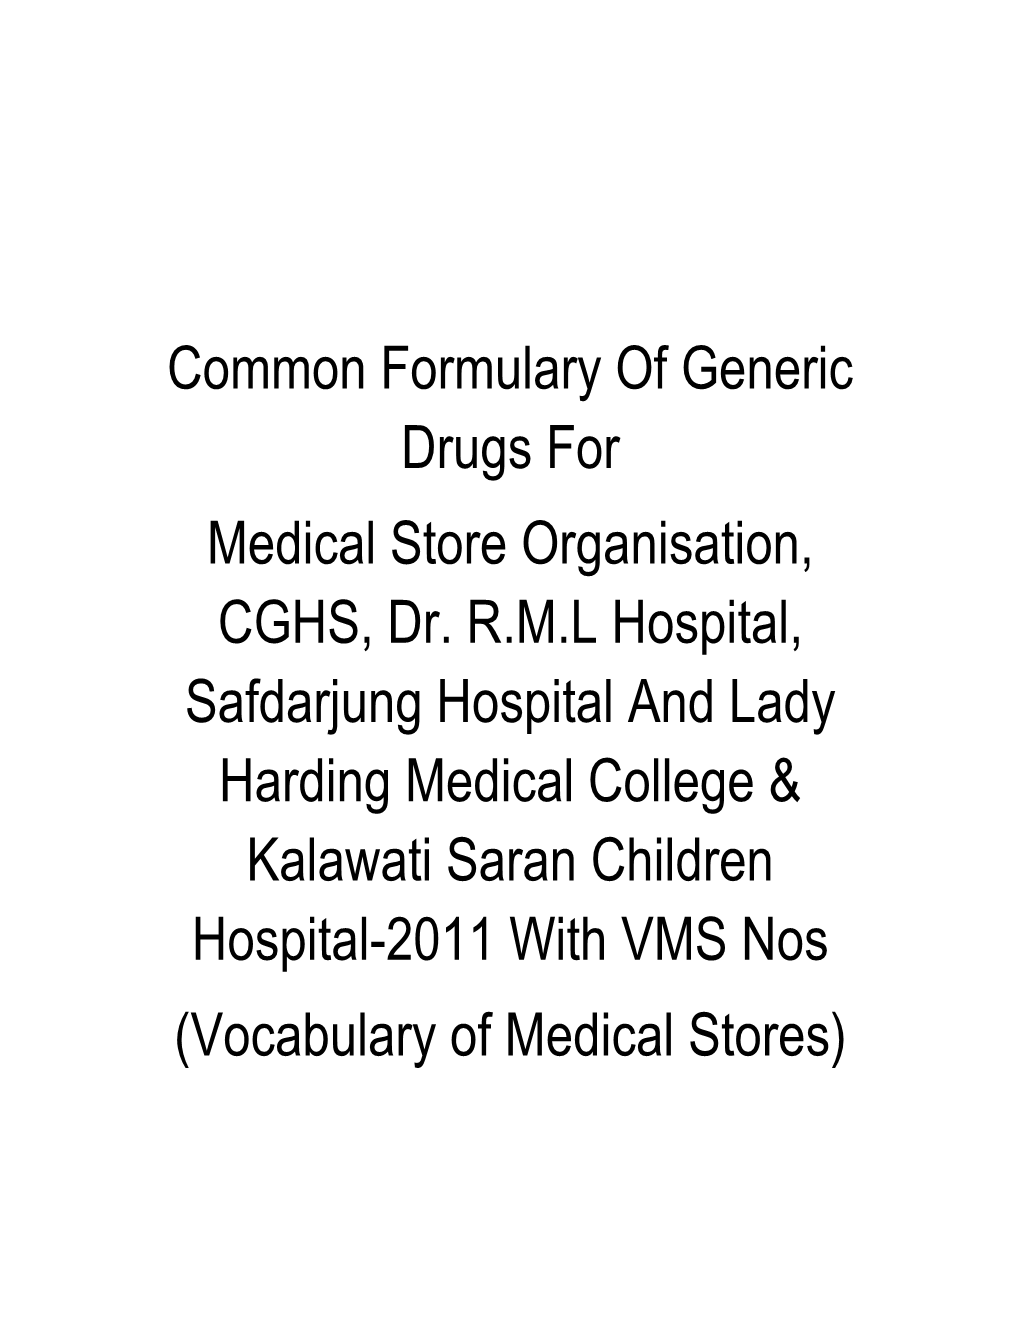 Common Formulary of Generic Drugs for Medical Store Organisation, CGHS, Dr